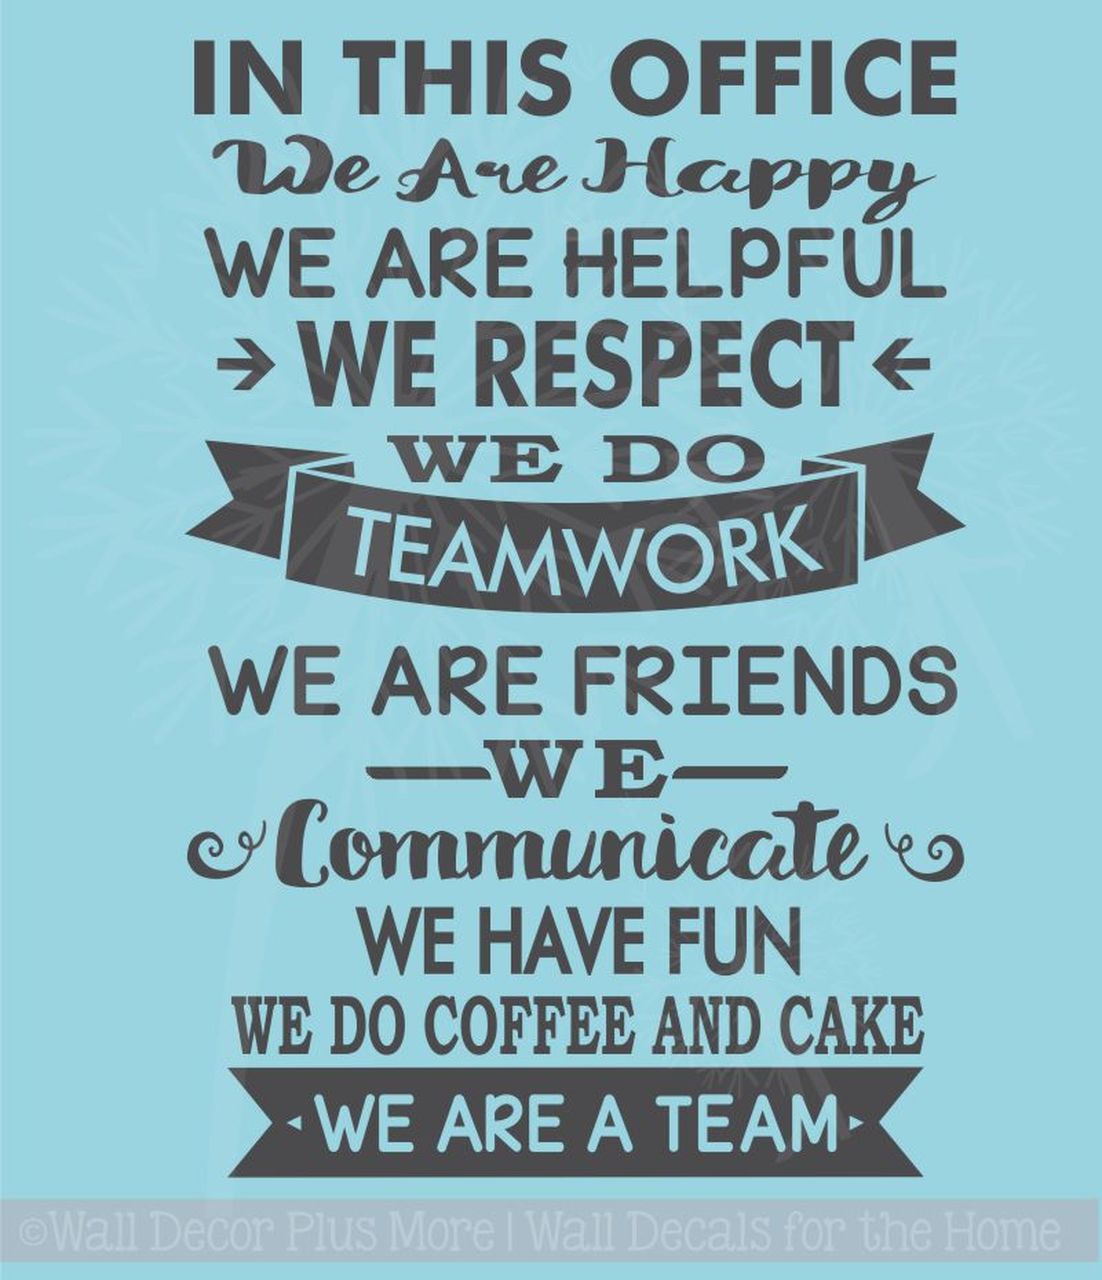 in this office we are happy we are helpful we respect we do teamwork we are friends we communicate we have fun we do coffee and cake we are a team